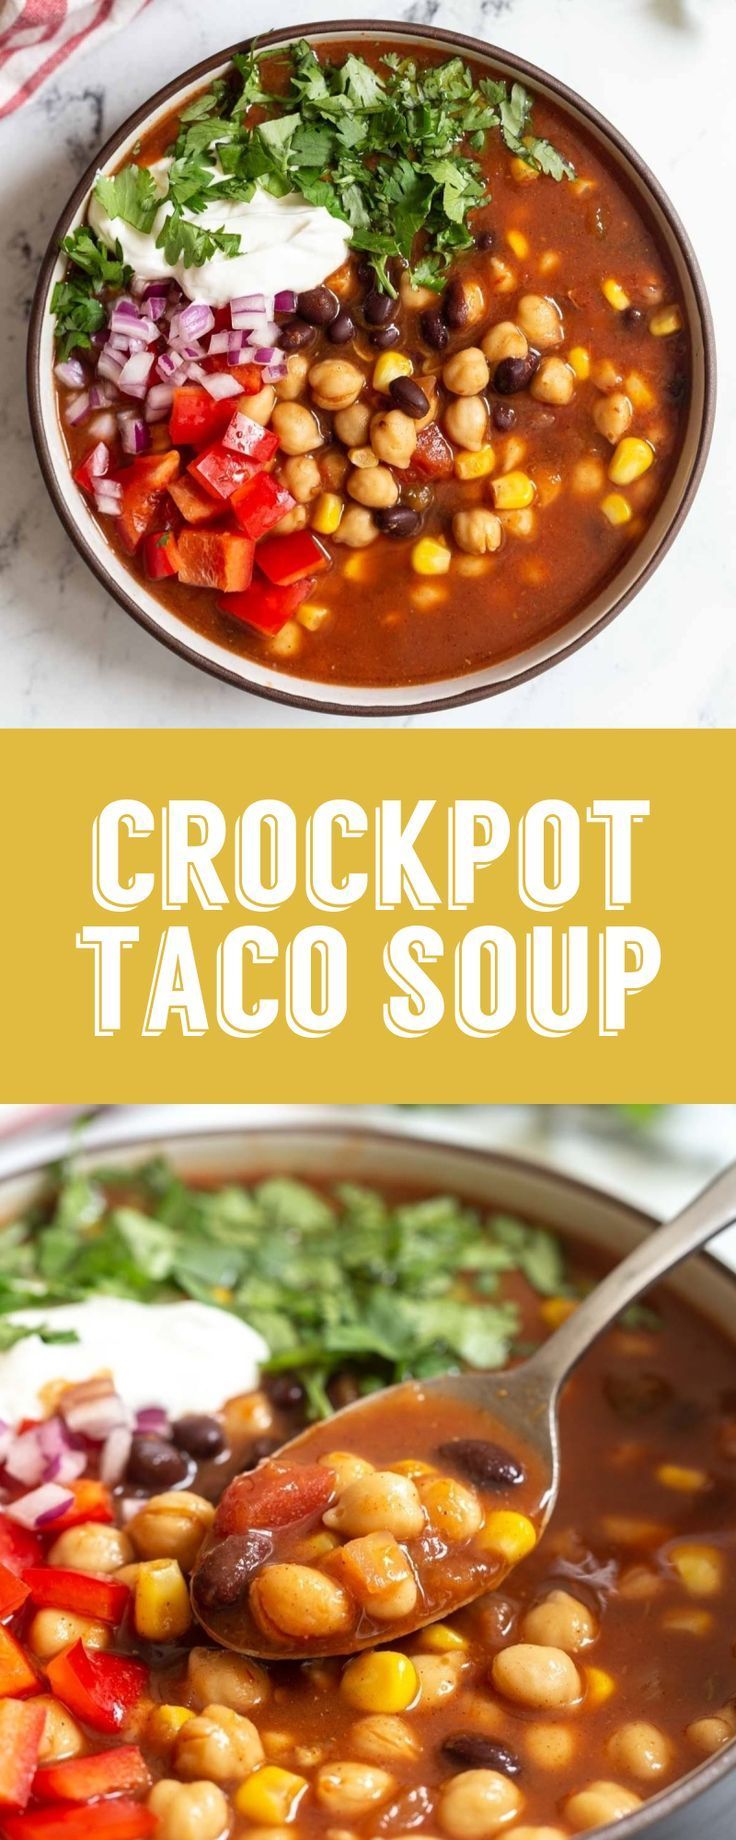 Crockpot Taco Soup | Food with Feeling -   18 healthy recipes For Weight Loss slow cooker ideas